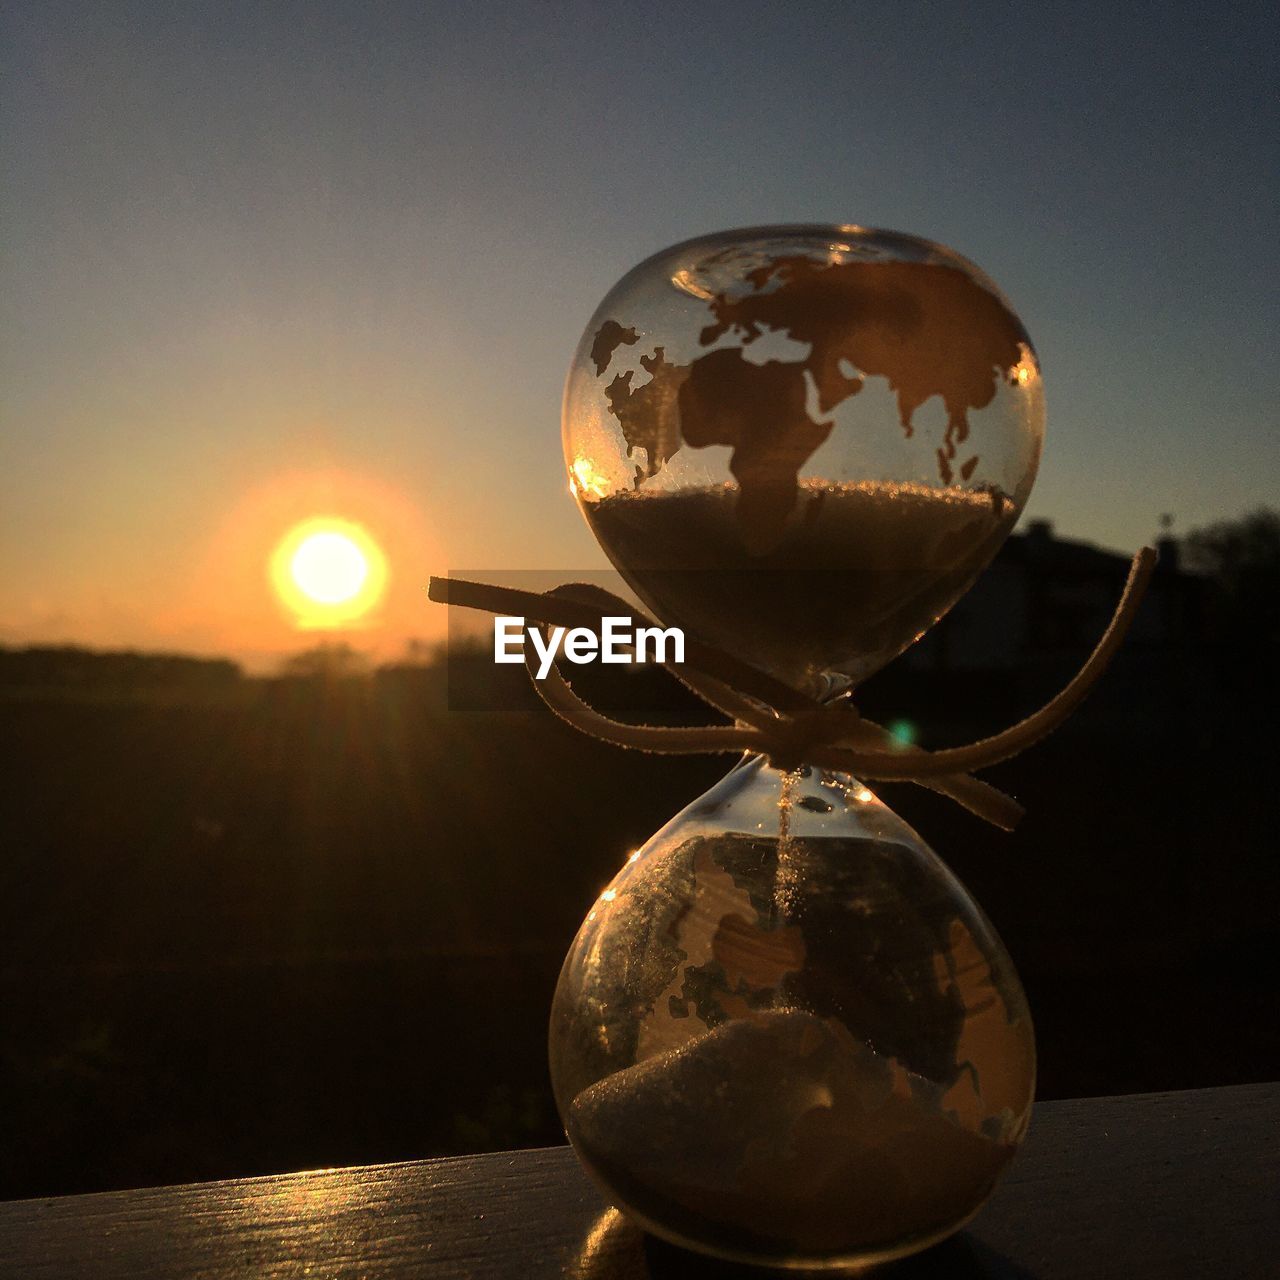 CLOSE-UP OF CRYSTAL BALL ON TABLE AGAINST SUNSET